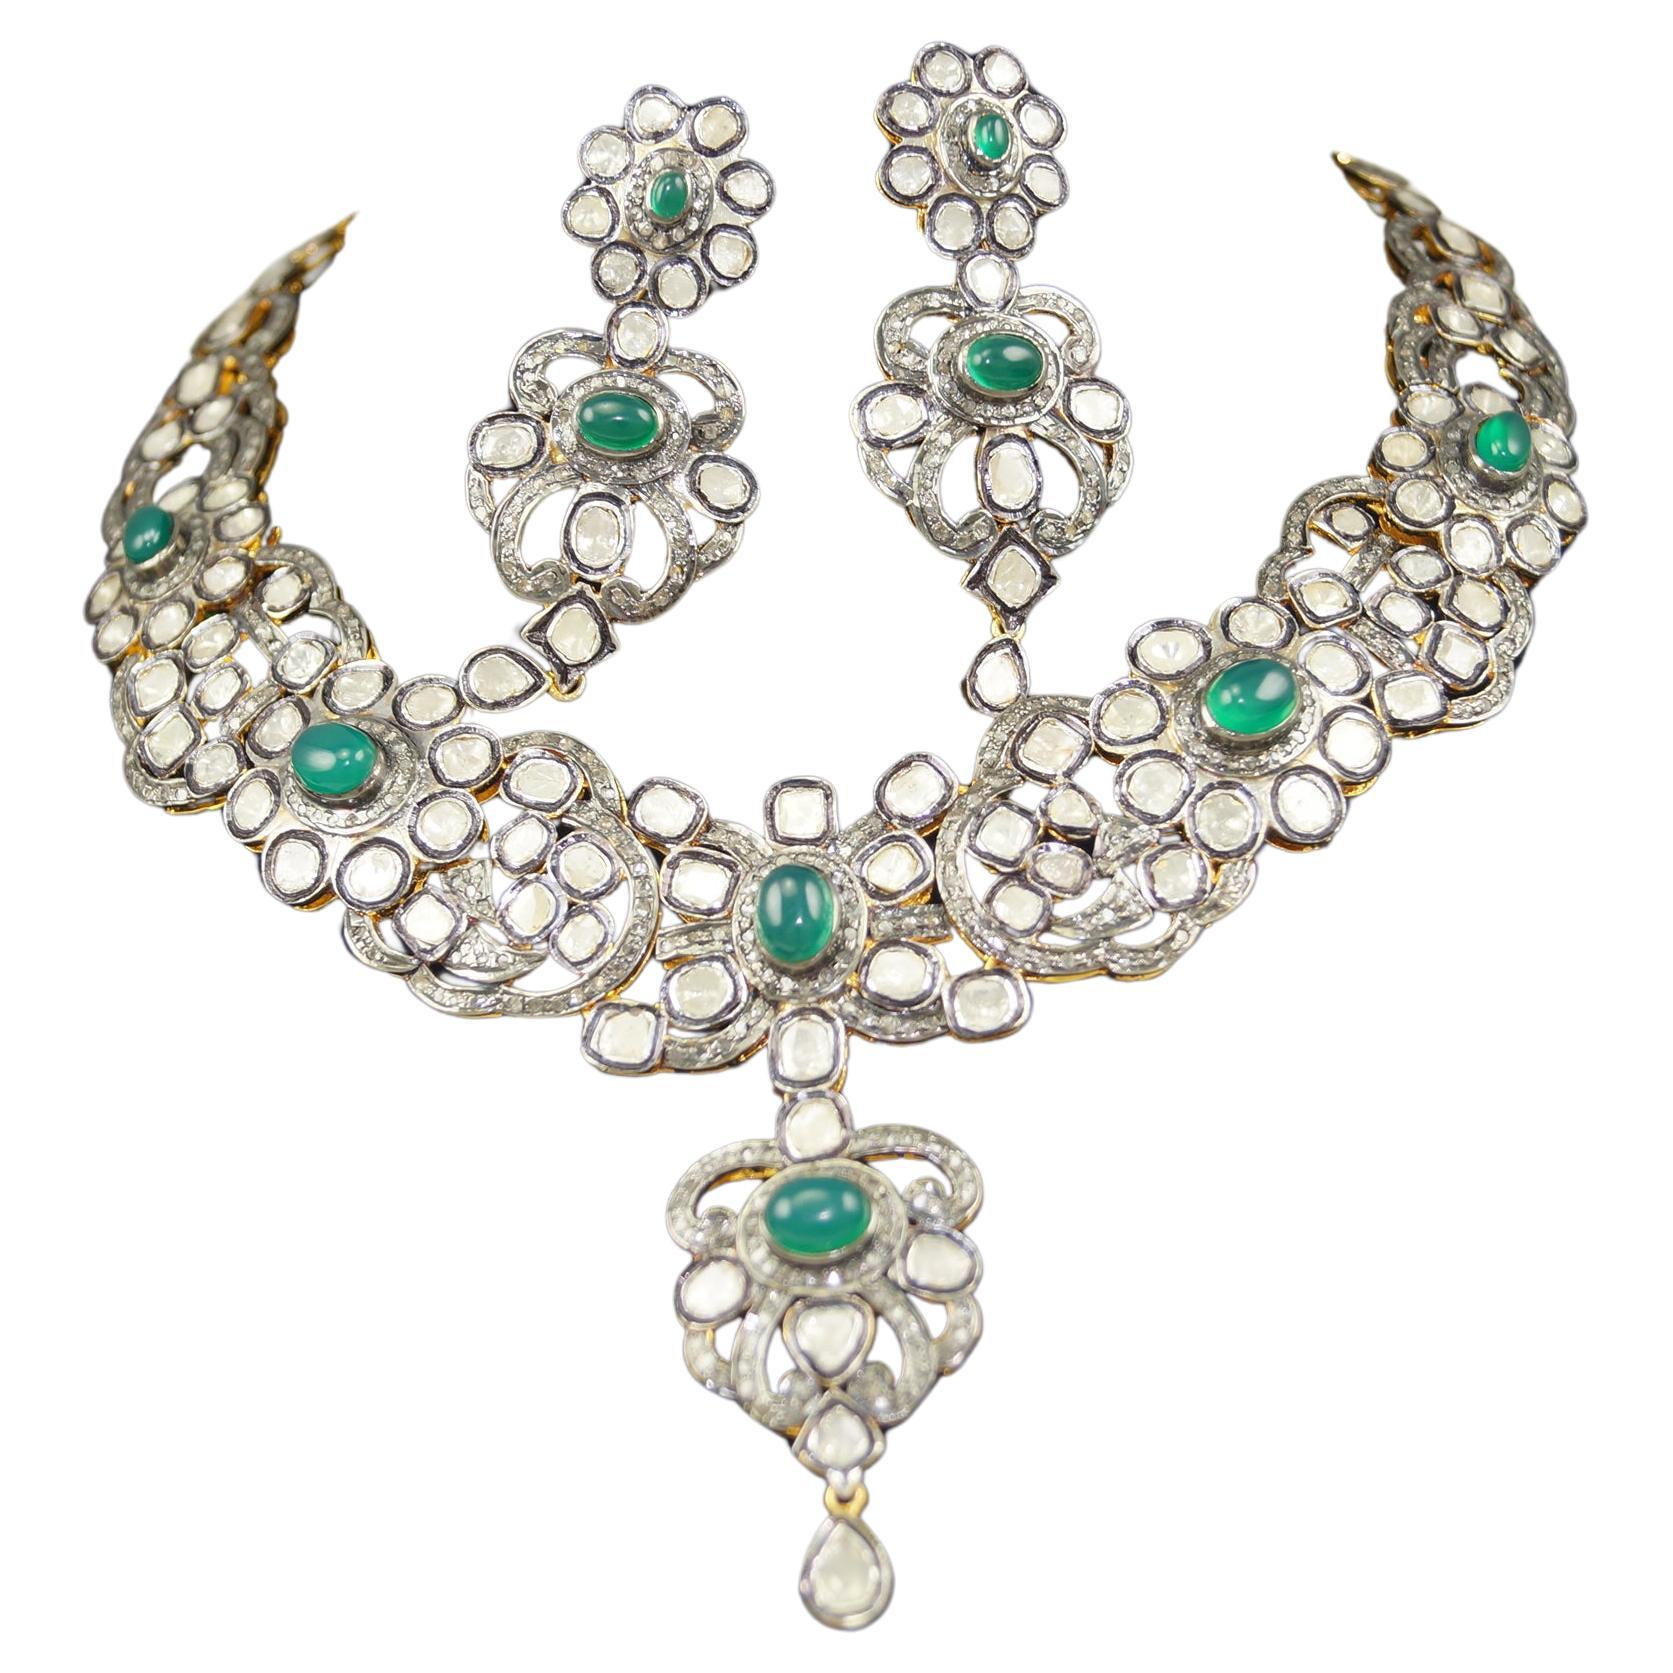 This gorgeous Floral Style necklace set is unique in itself. It has been created by the fine artisans using Natural real Uncut Diamond and Moonstone. The Gemstones and Diamonds have been arranged in the floral pattern. This makes it a perfect jewel